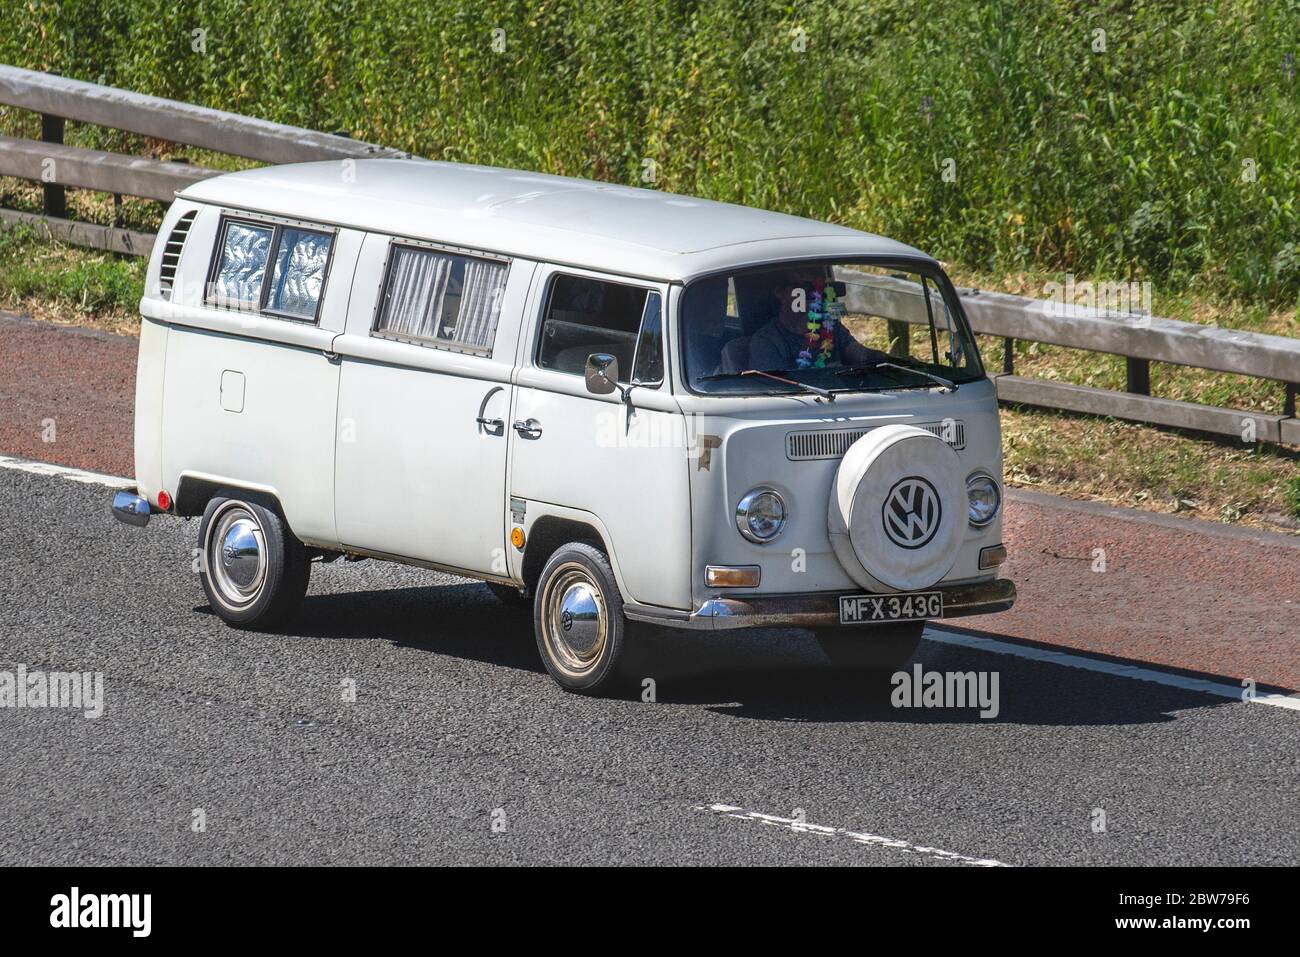 1969 60s Cream VW Transporter; Touring Caravans and Motorhomes, campervans on Britain's roads, RV leisure vehicle, family holidays, caravanette vacations, caravan holiday, van conversions, autohome, life on the road Stock Photo